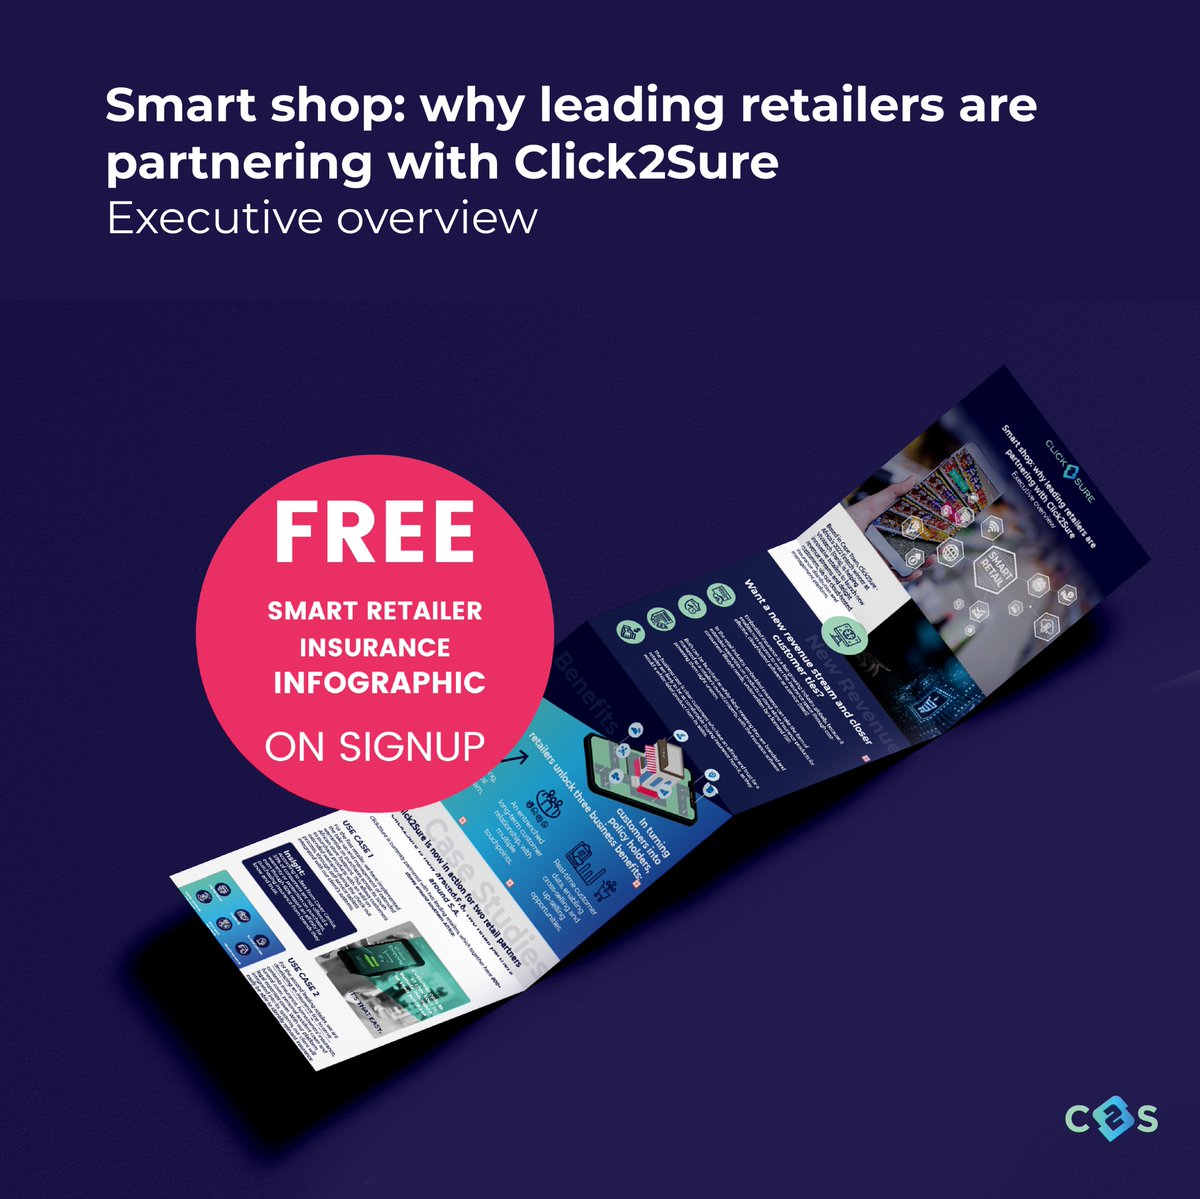 Innovative retailer interested in launching white-label embedded insurance for your customers? 

Our game-changing solution unpacked,
 in today’s must-have infographic. click2sure.co.za/smart-retailer…
#retail #retailers #extendedwarranties #valueaddedservices #innovation #OEMs